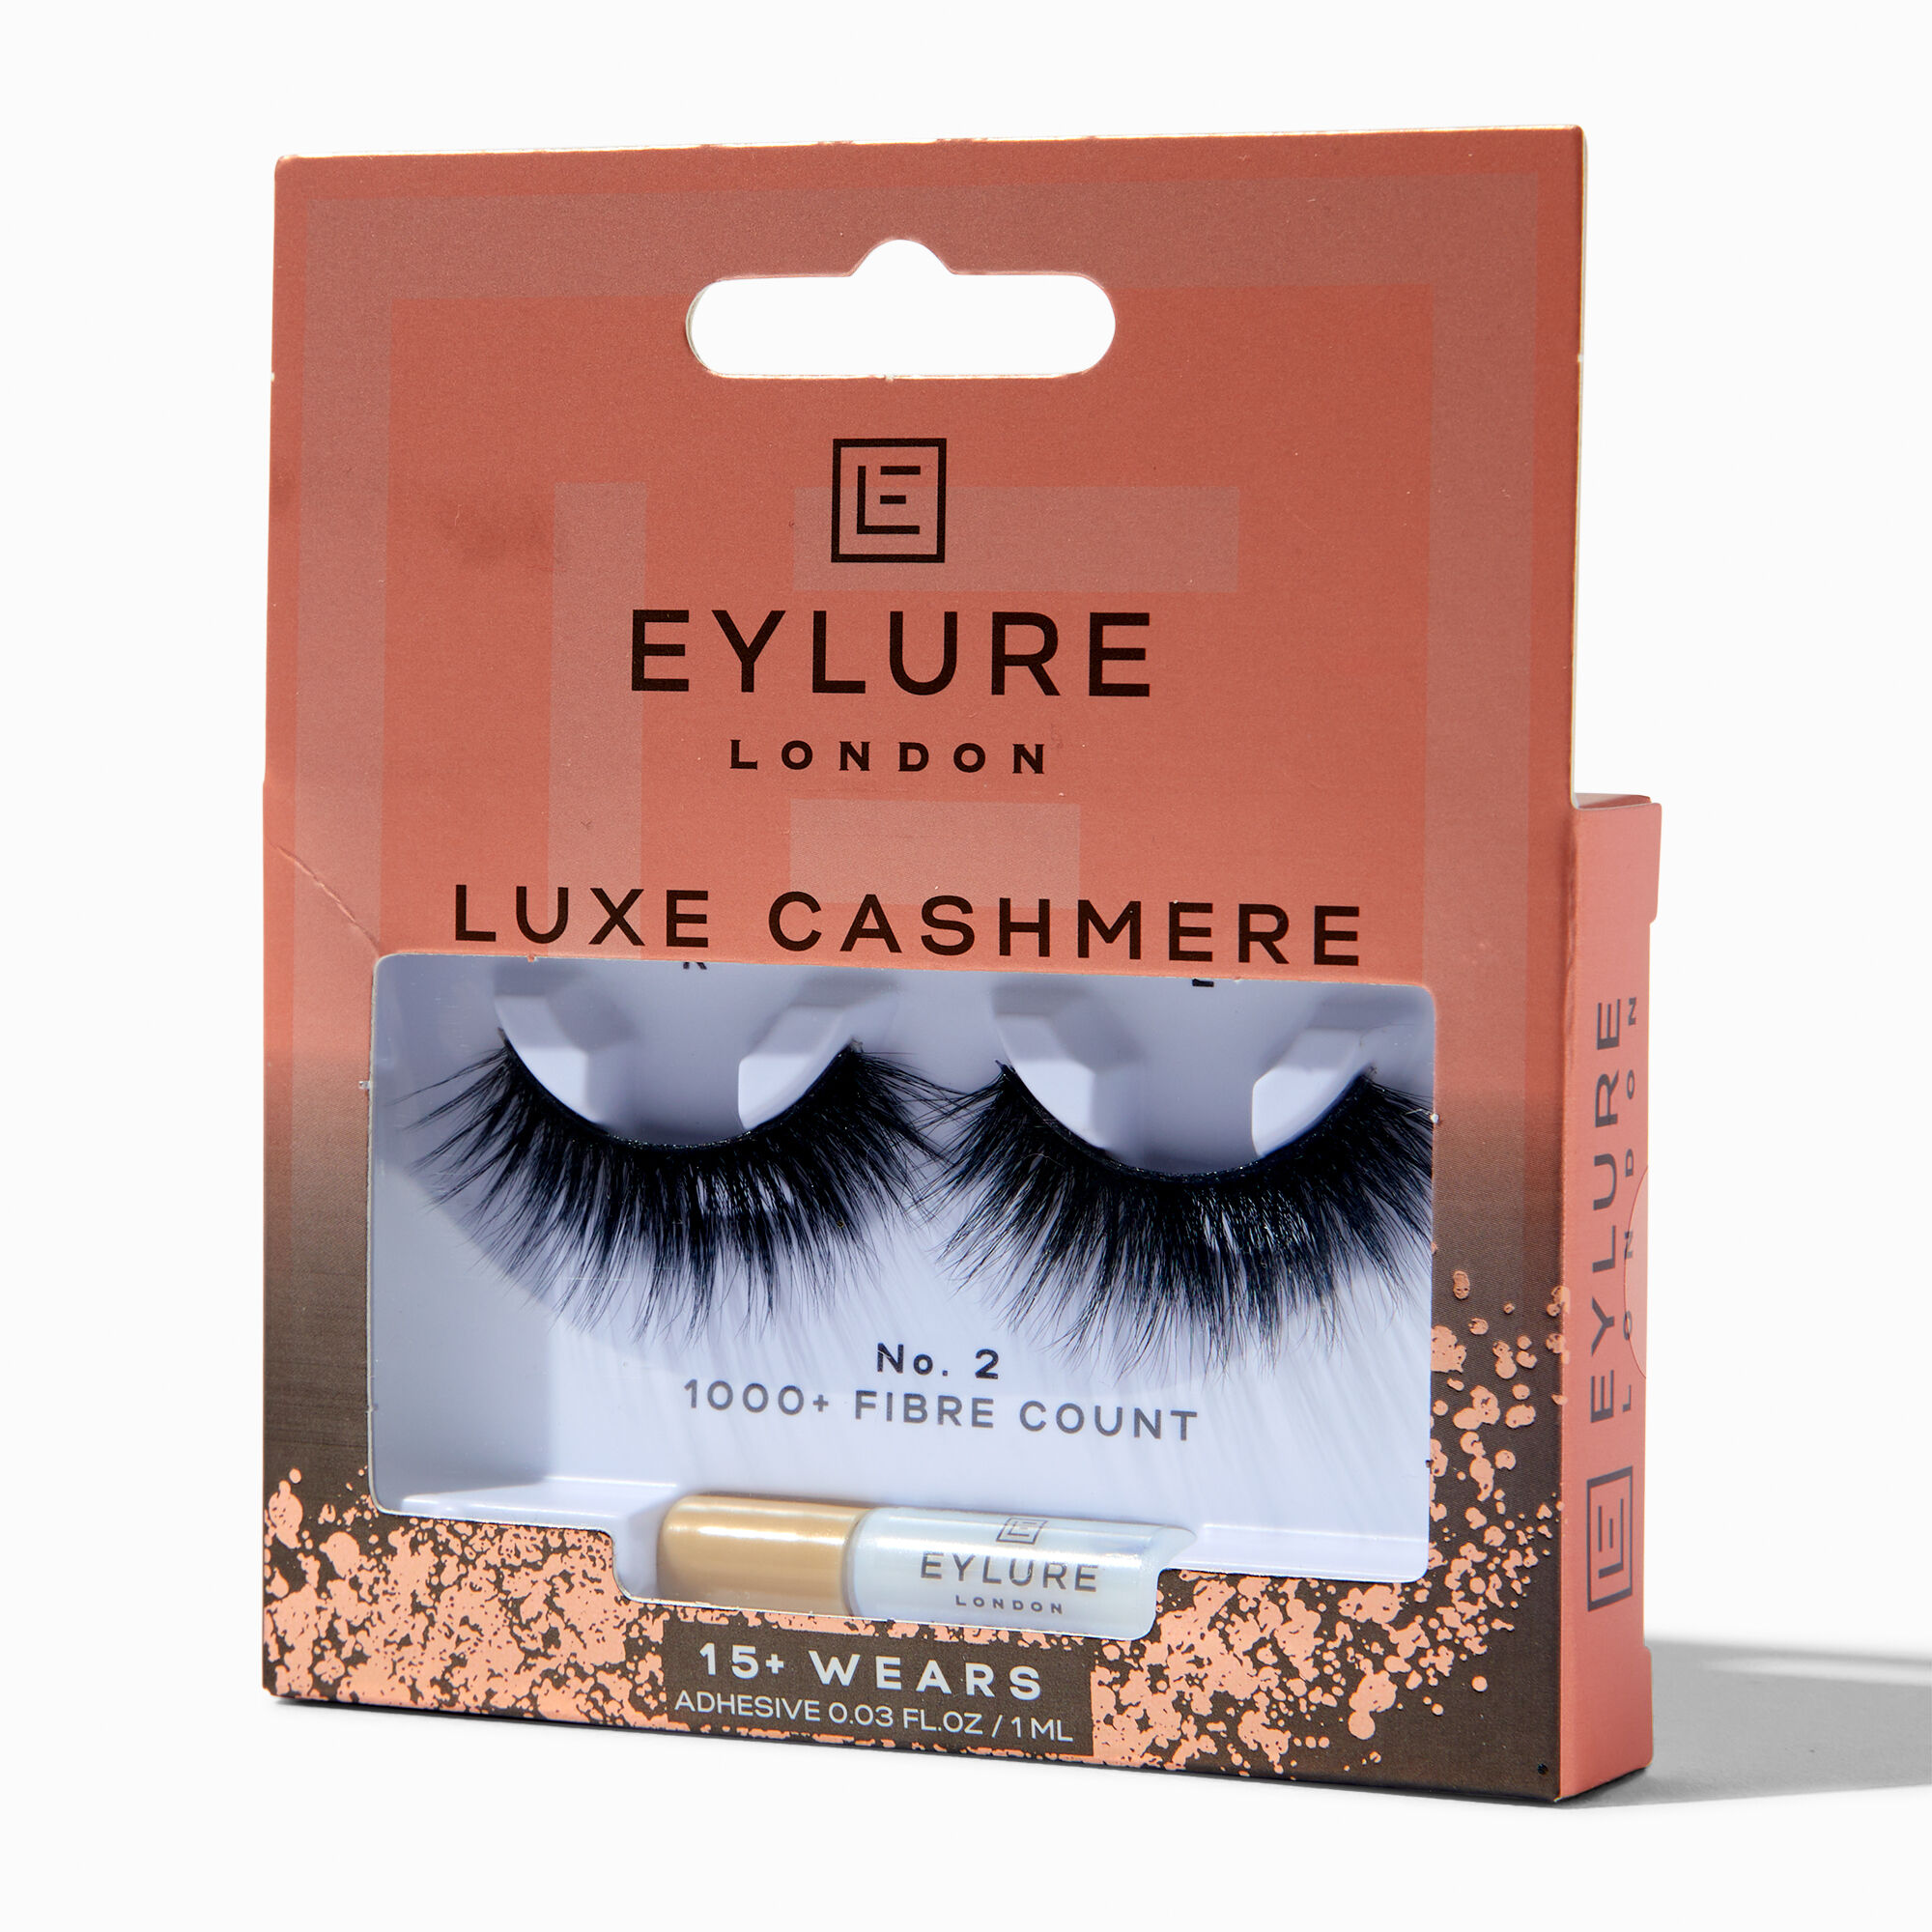 View Claires Eylure Luxe Cashmere No 2 False Lashes information